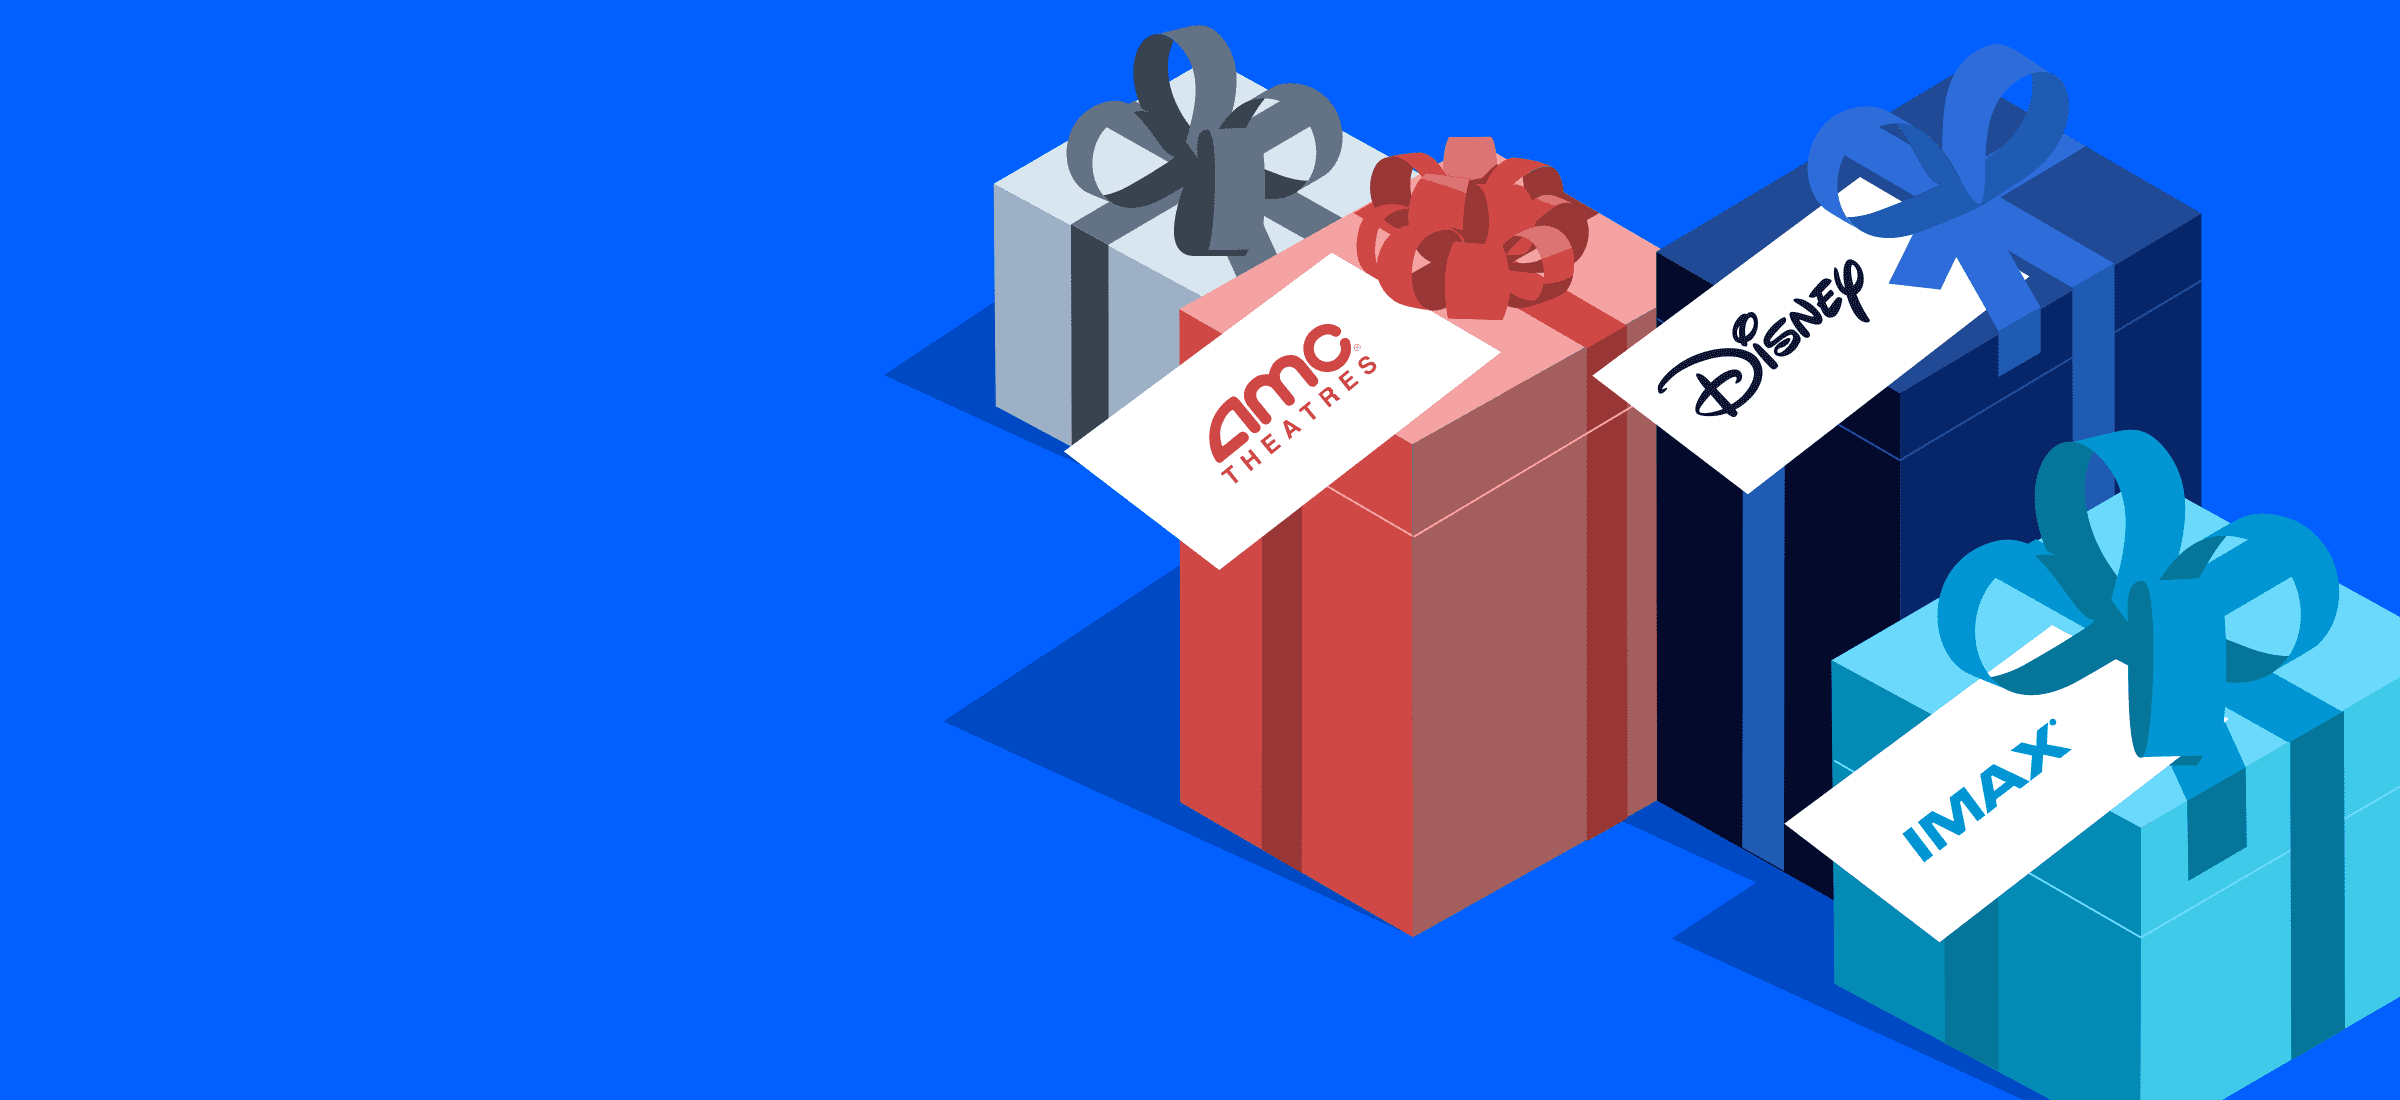 4 gifts with tags from AMC, Disney and IMAX.